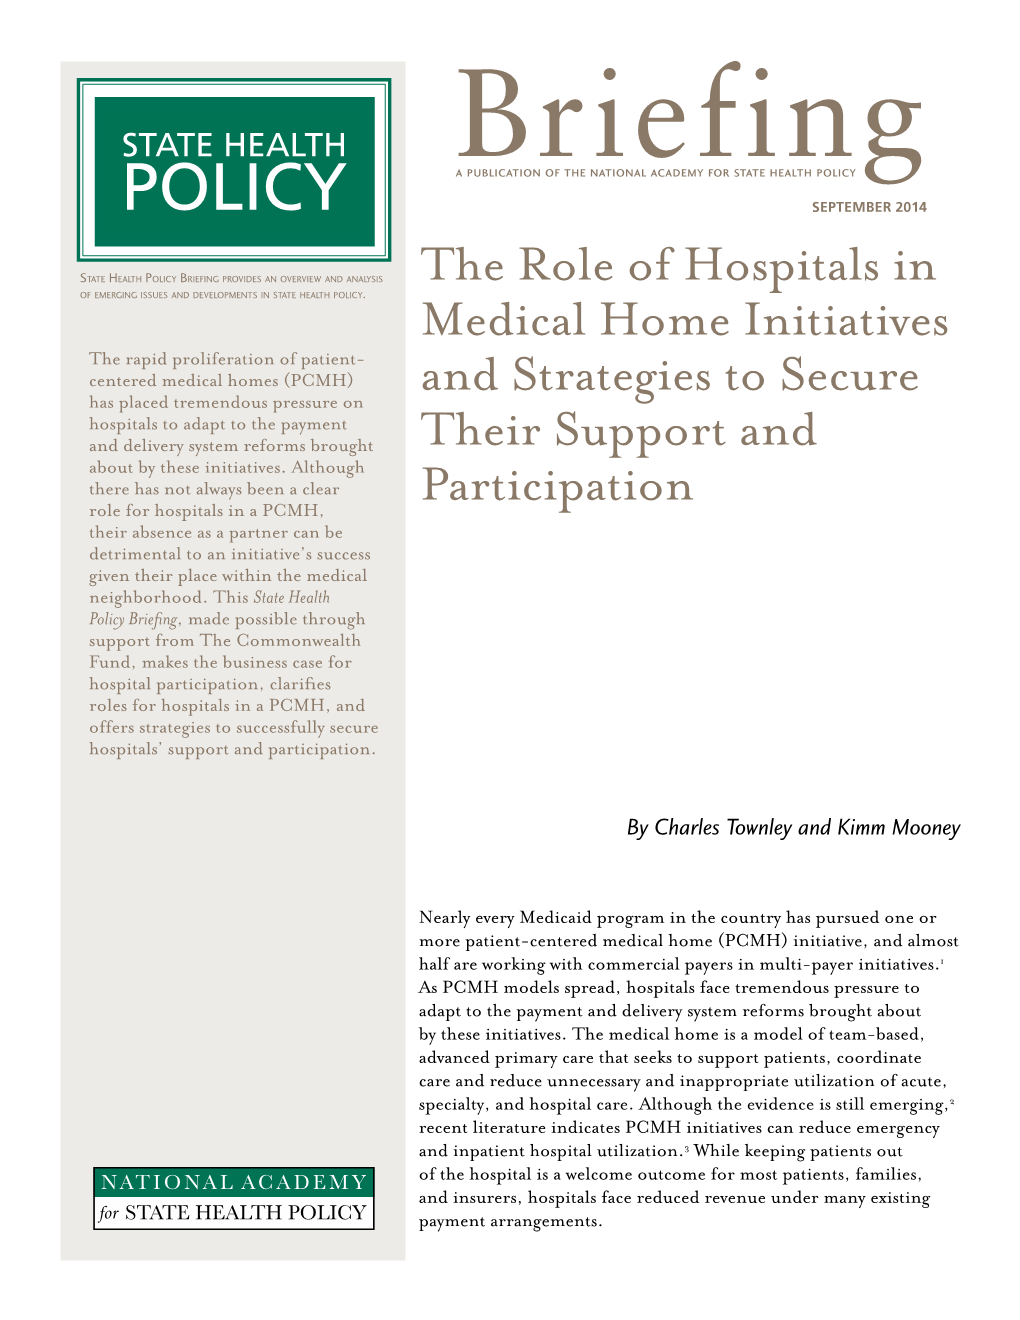 The Role of Hospitals in Medical Home Initiatives and Strategies to Secure Their Support and Participation